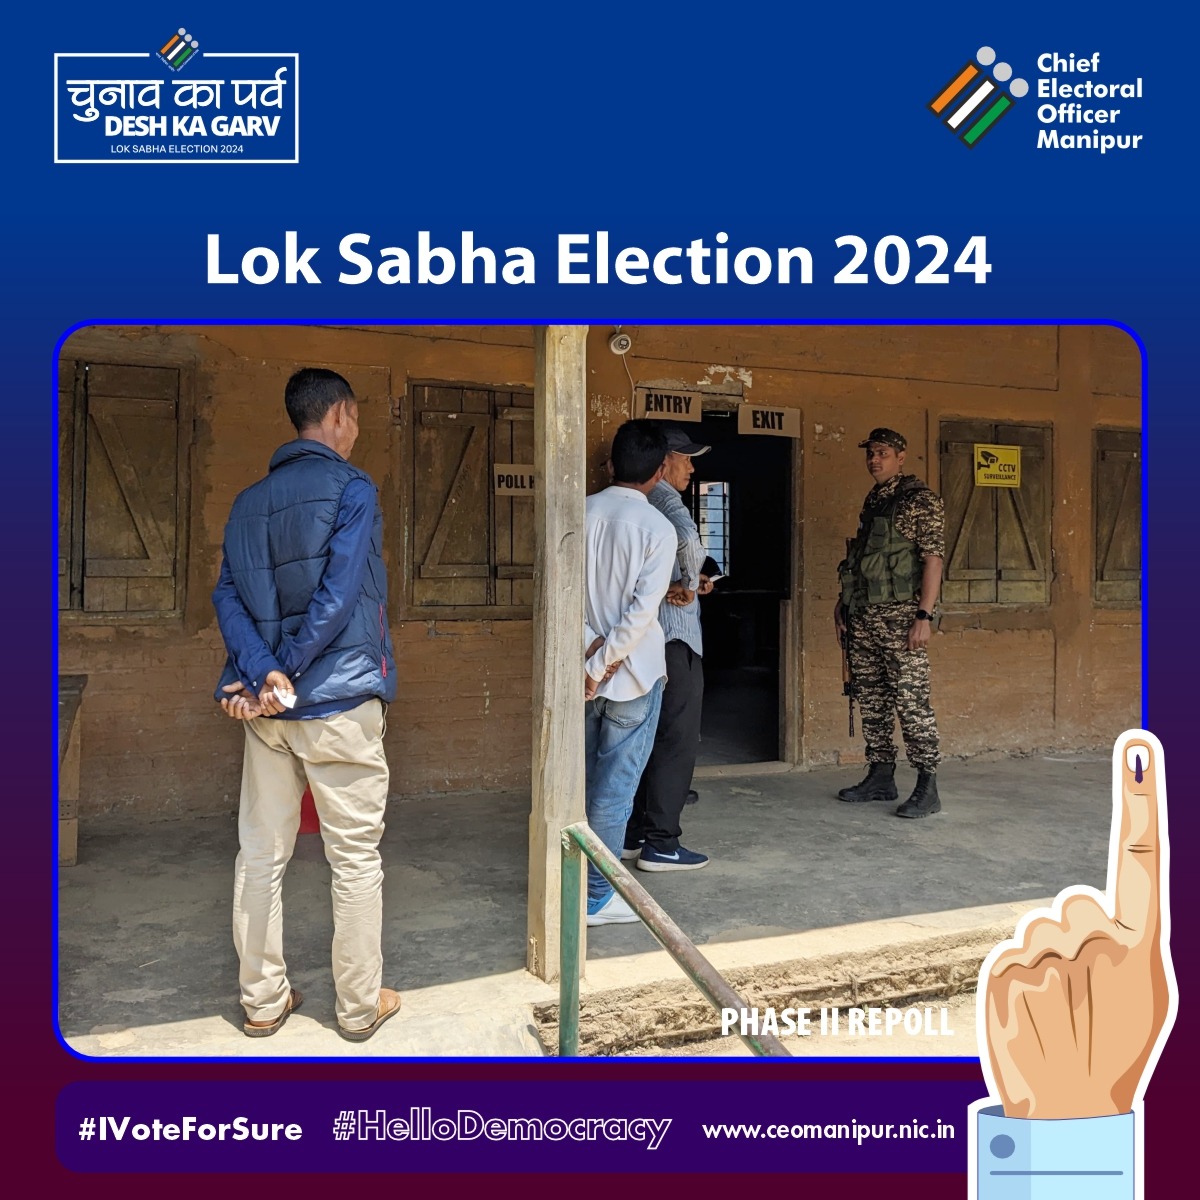 Visuals of re-poll at 6 polling stations of Phase-II, for 2-Outer Manipur Parliamentary Constituency. 

#ChunavKaParv #DeshKaGarv #IVote4Sure #HelloDemocracy #LokSabhaElections2024 #ECI #CEOManipur #VotingRights